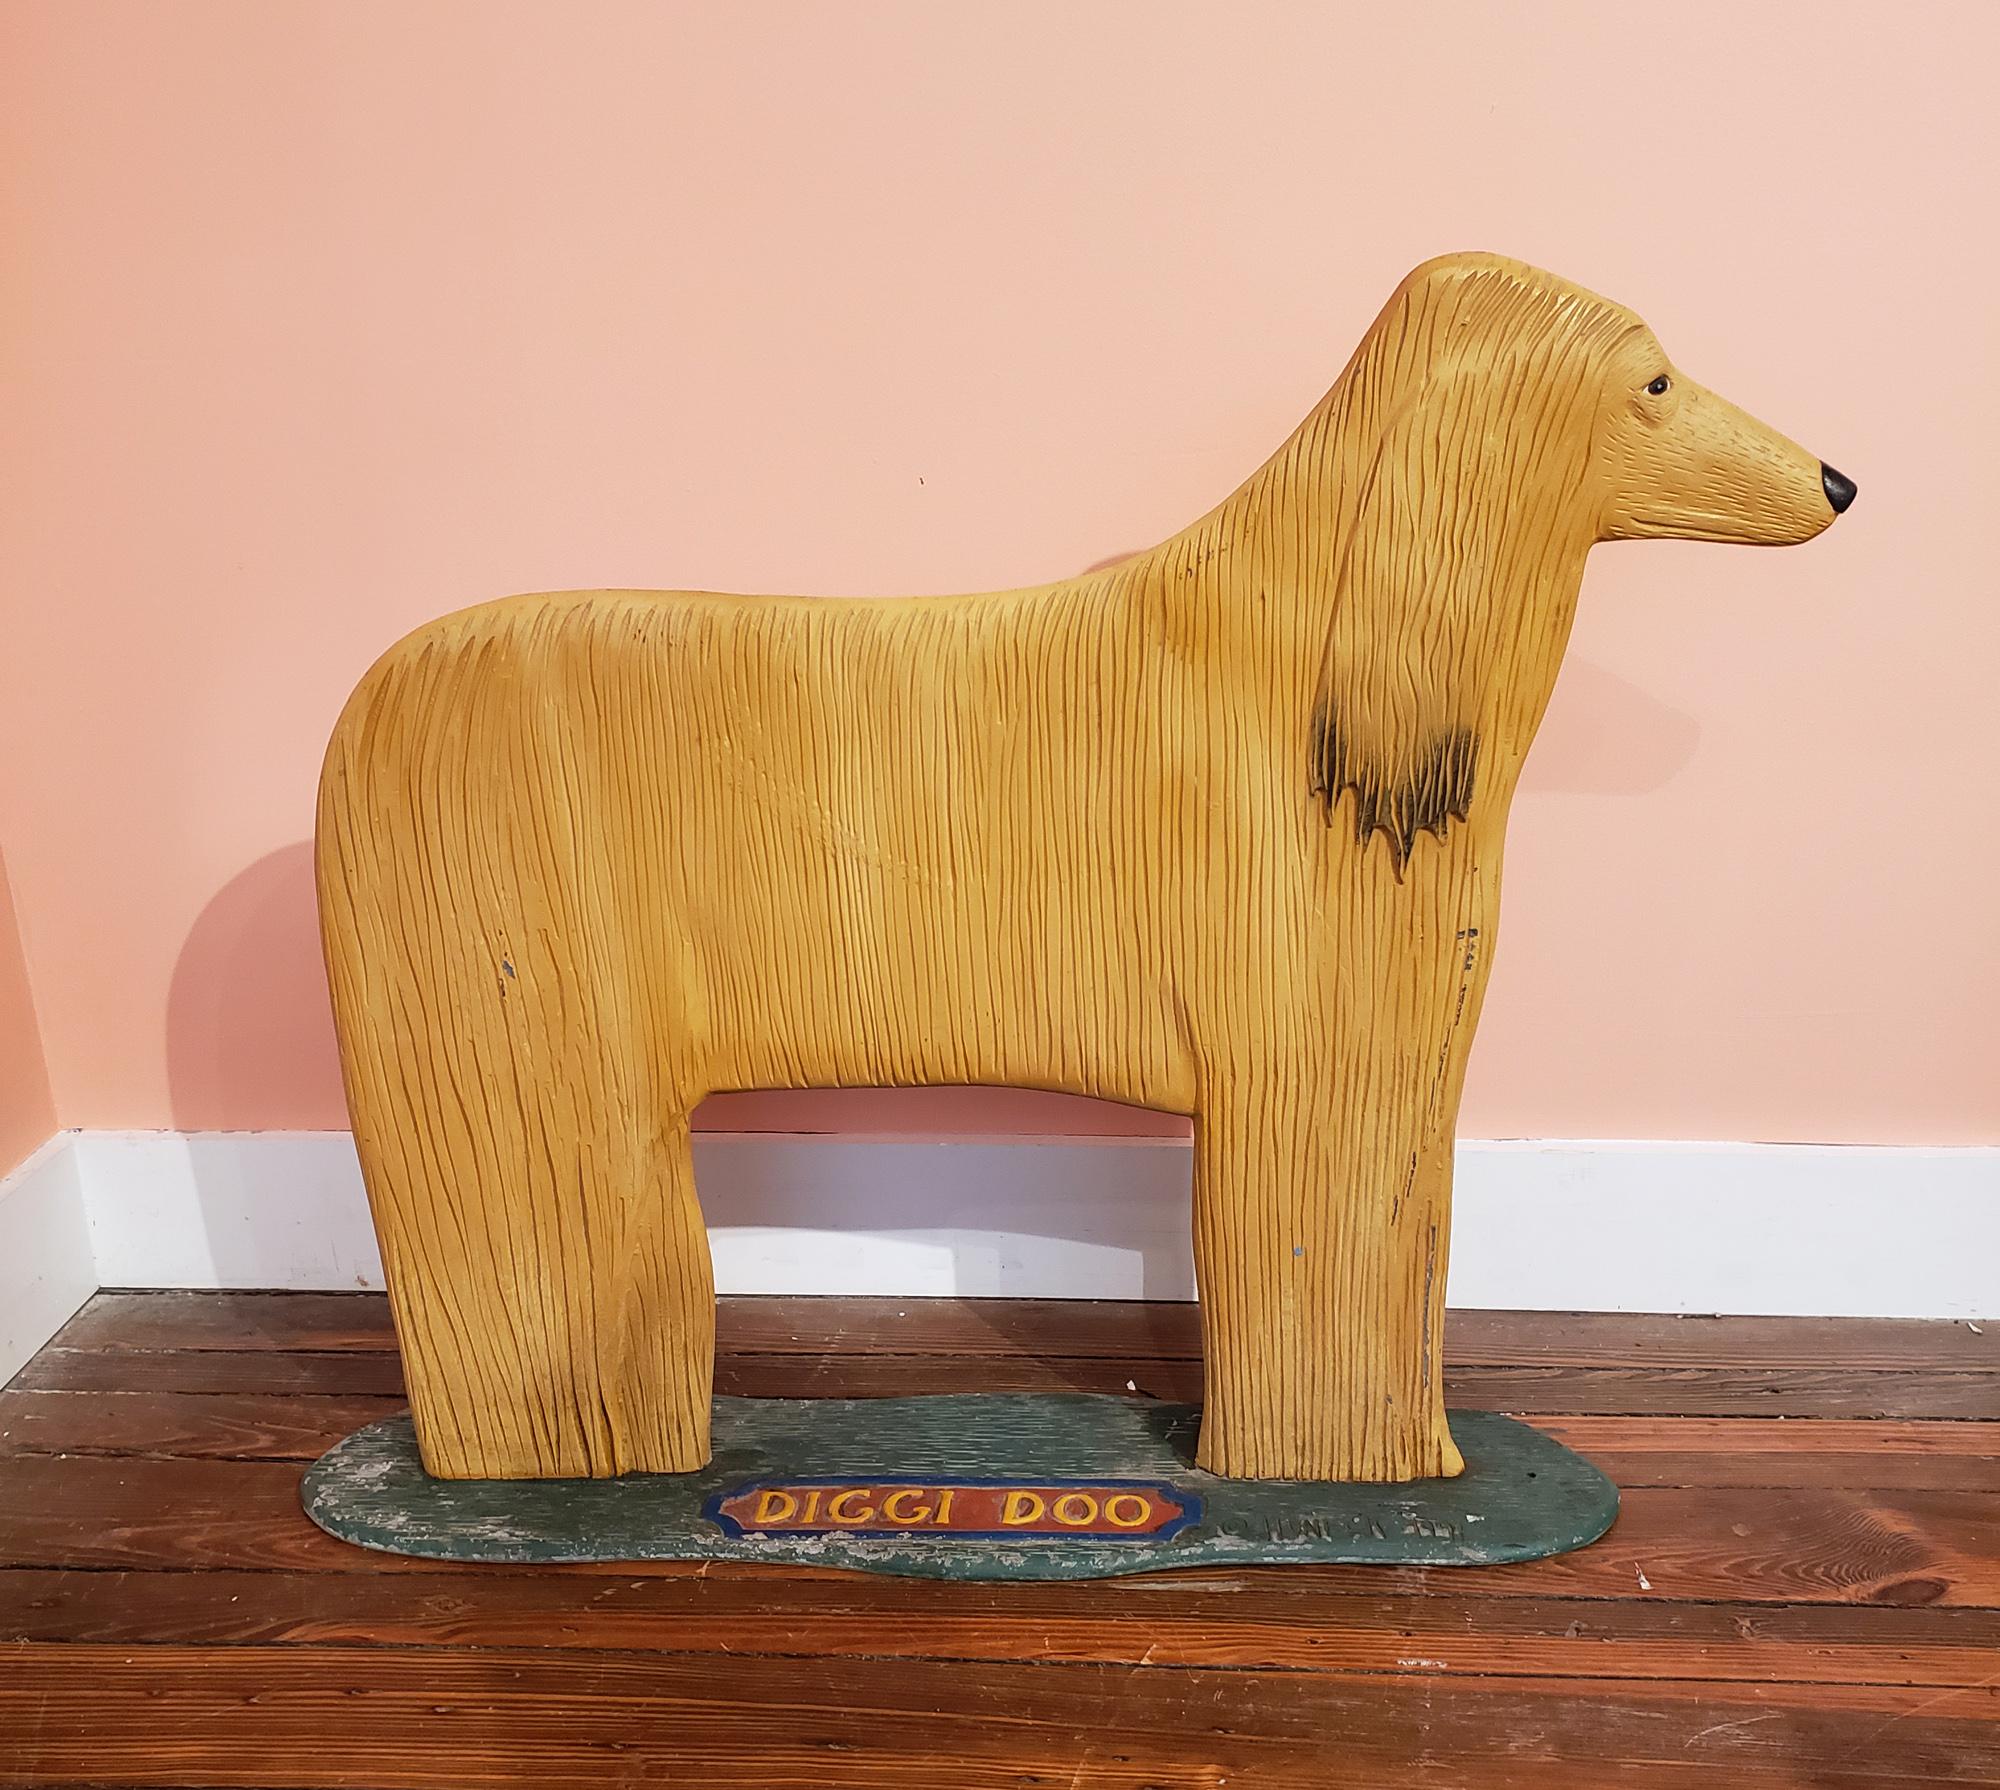 Late 20th Century Afghan Dog Sculptures, by Stephen Huneck, Vermont, 1991, Signed and Dated